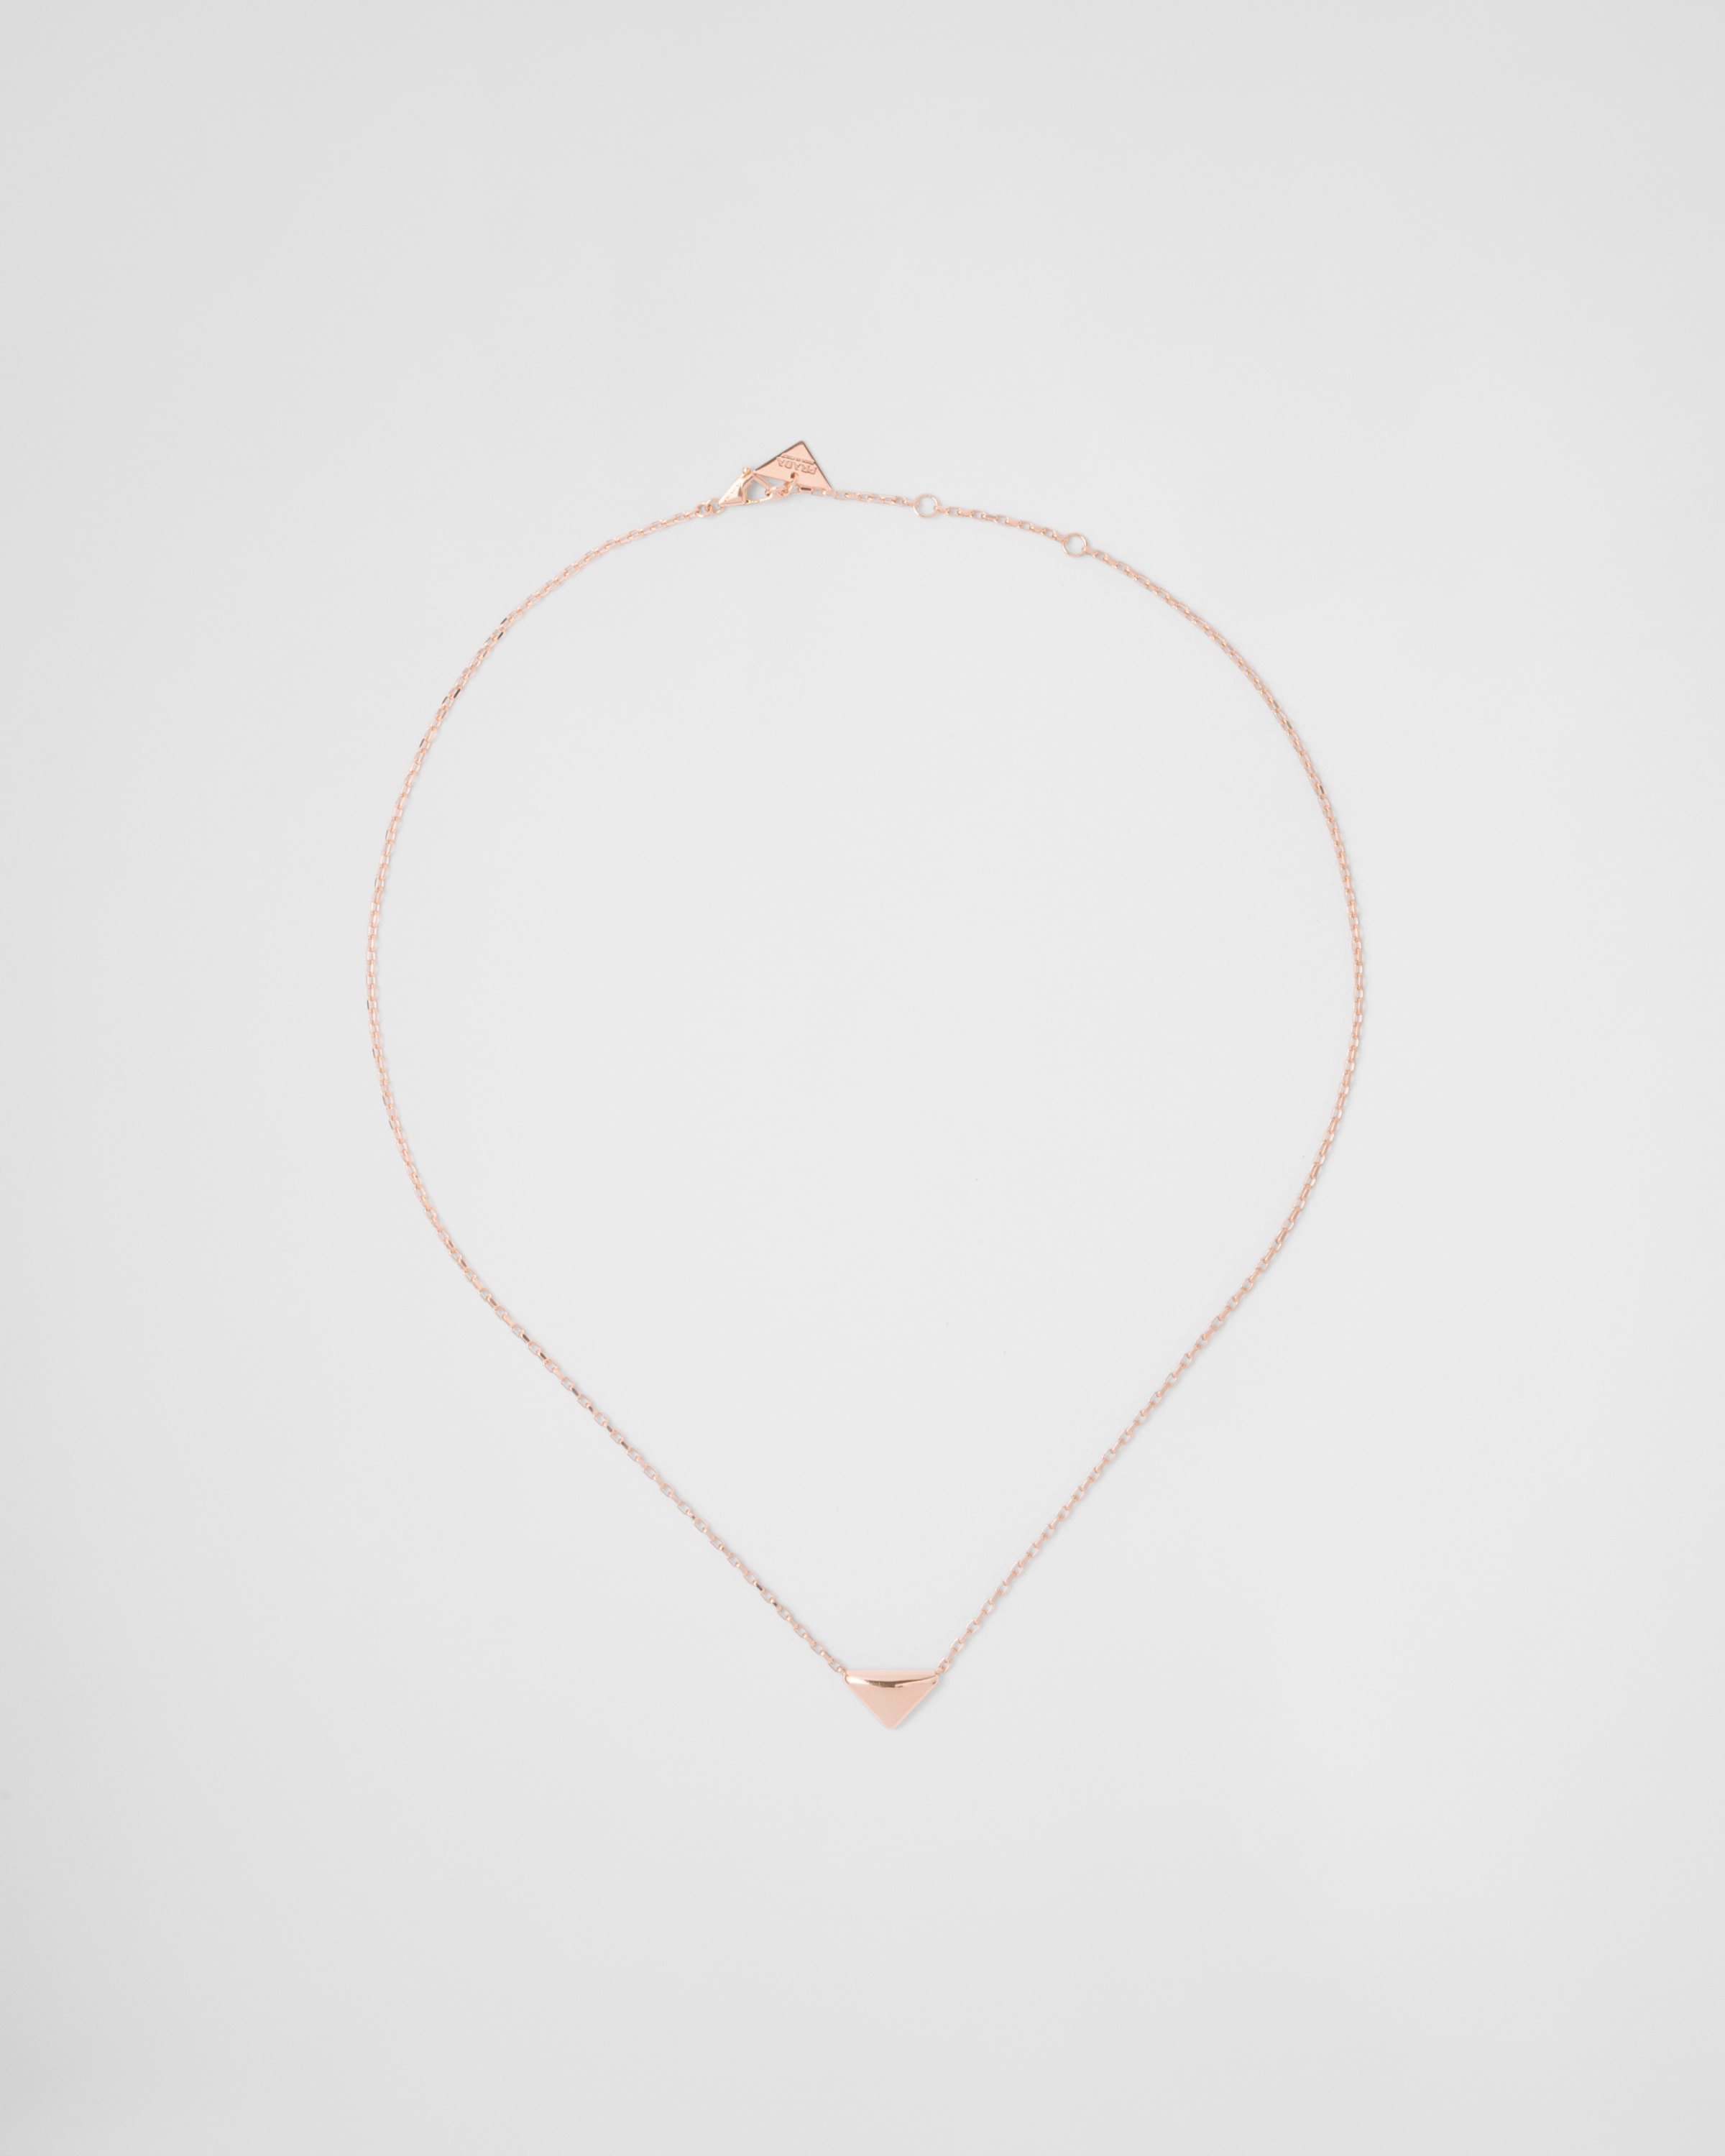 Eternal Gold necklace in pink gold with nano triangle pendant - 1